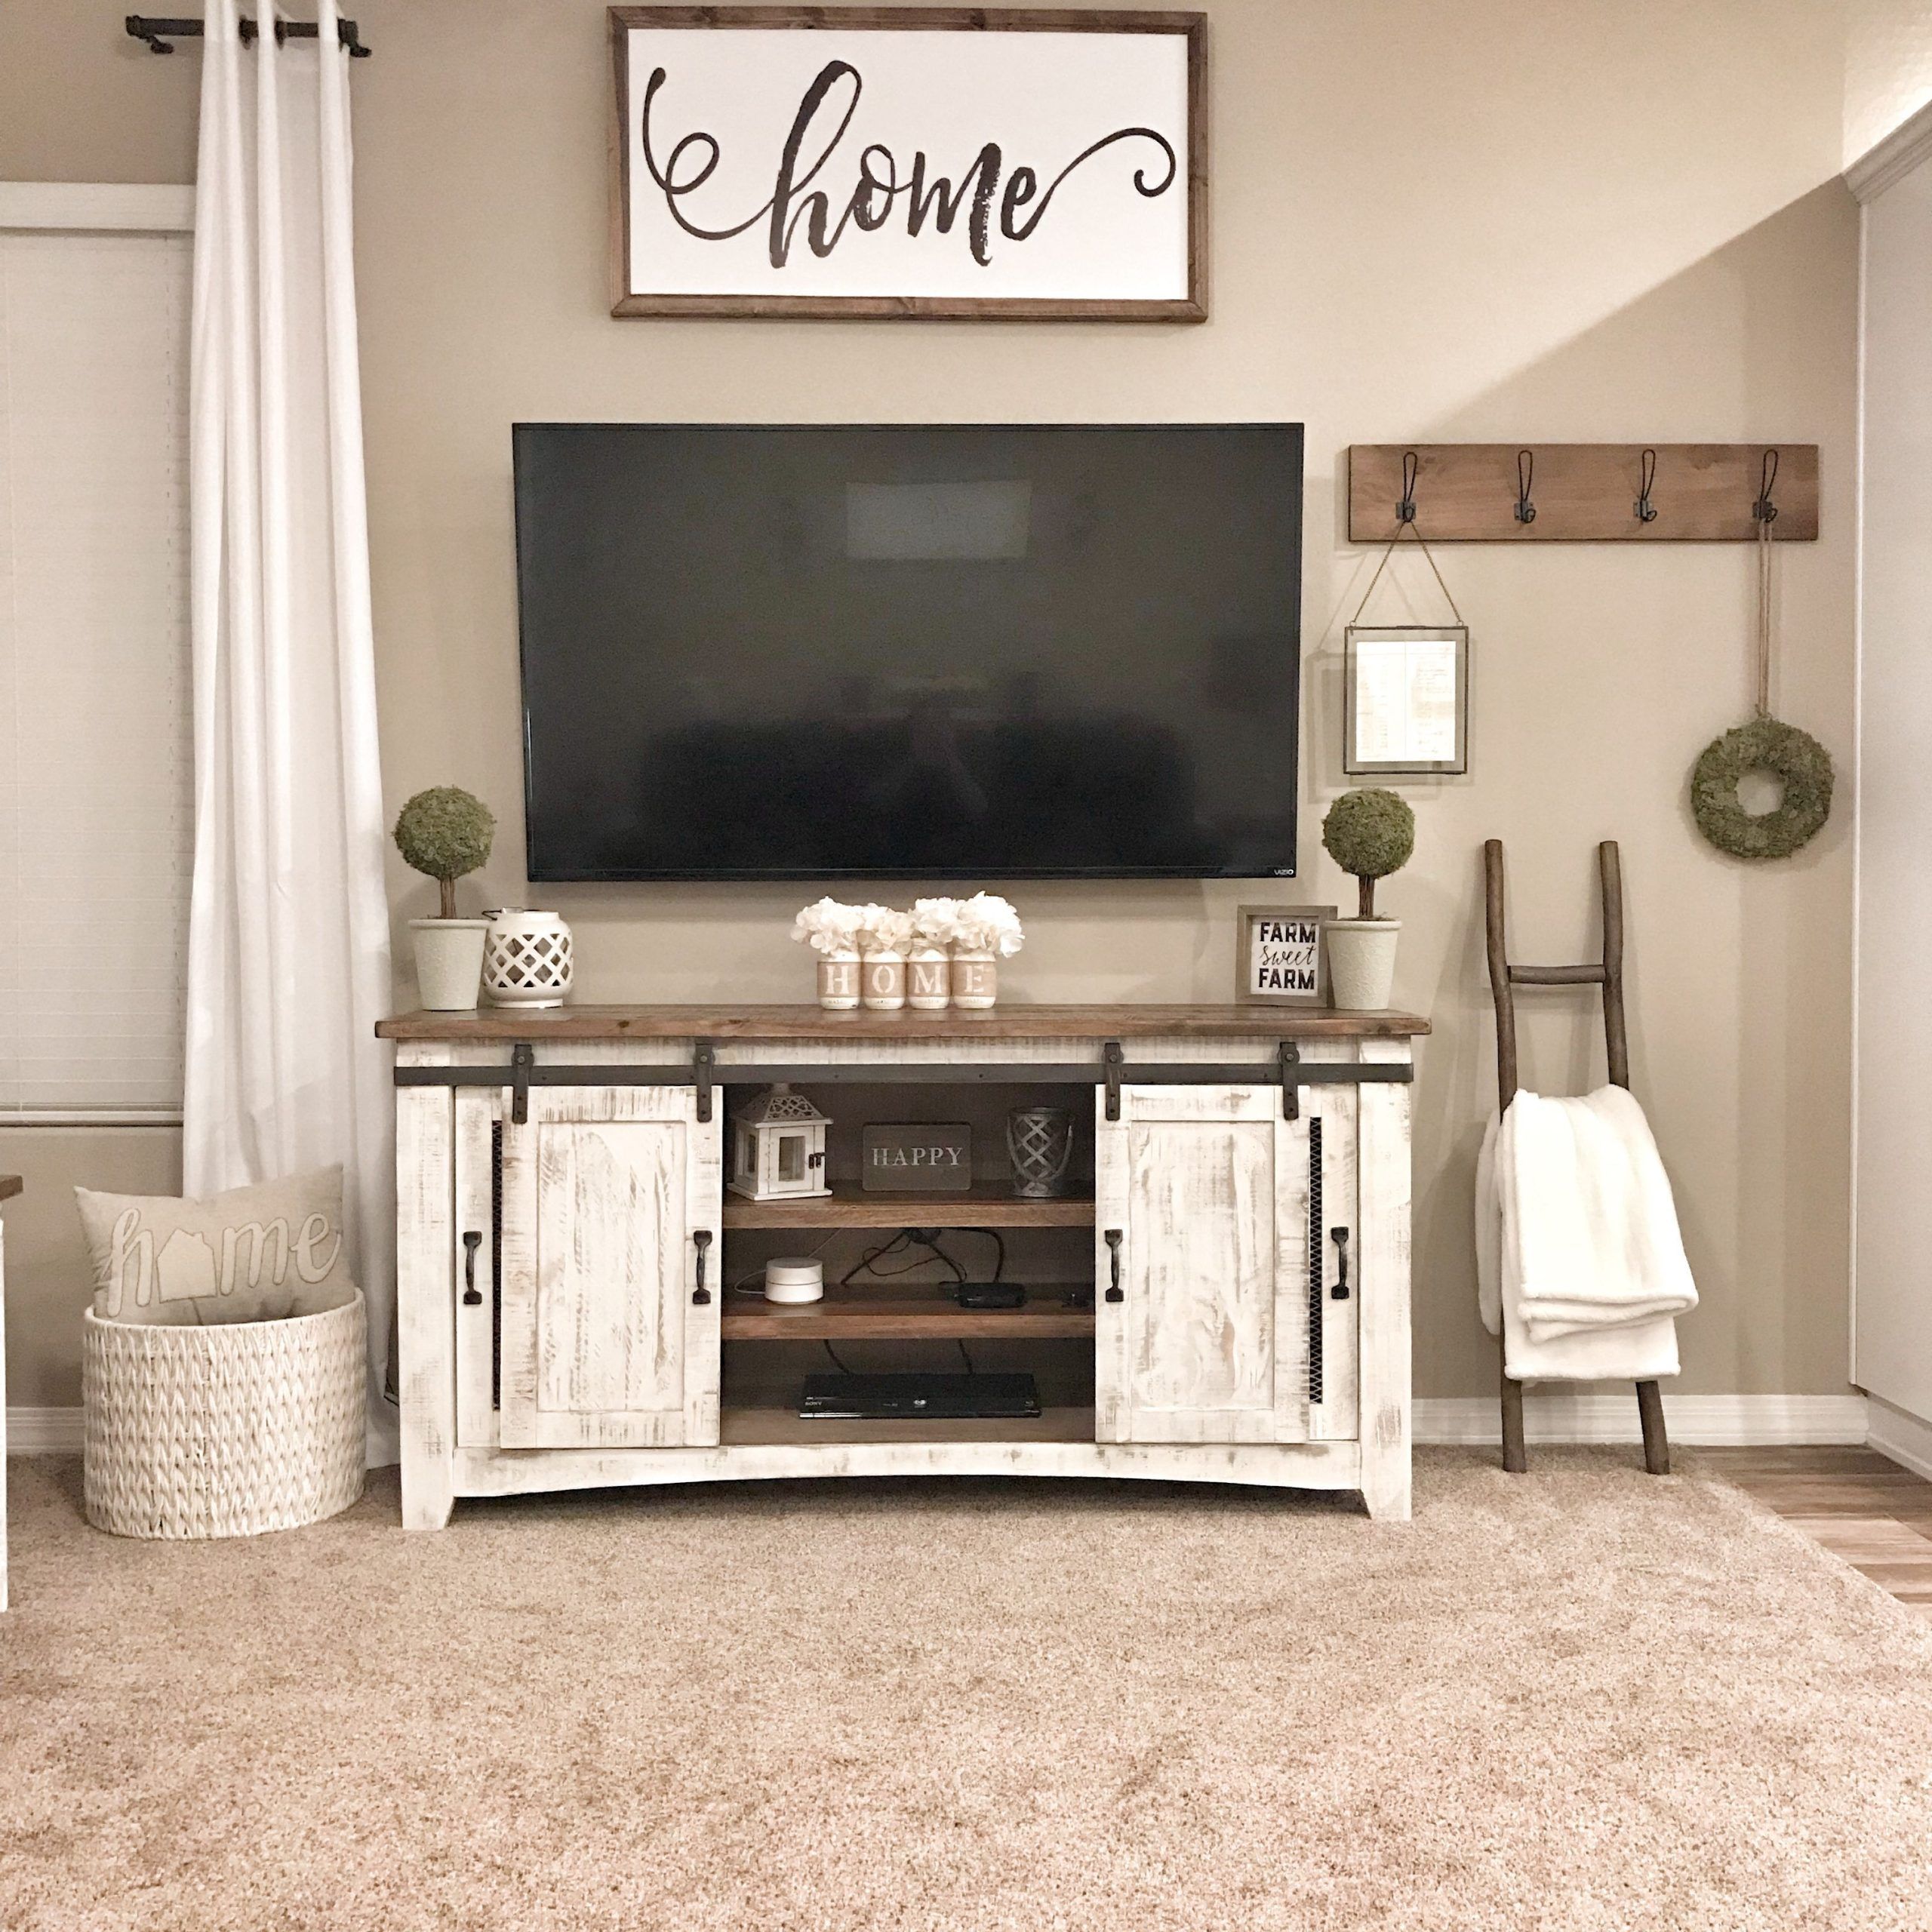 Farmhouse Tv Stand Decor #tvstanddesign | Farm House Living Room Inside Modern Farmhouse Rustic Tv Stands (View 19 of 20)